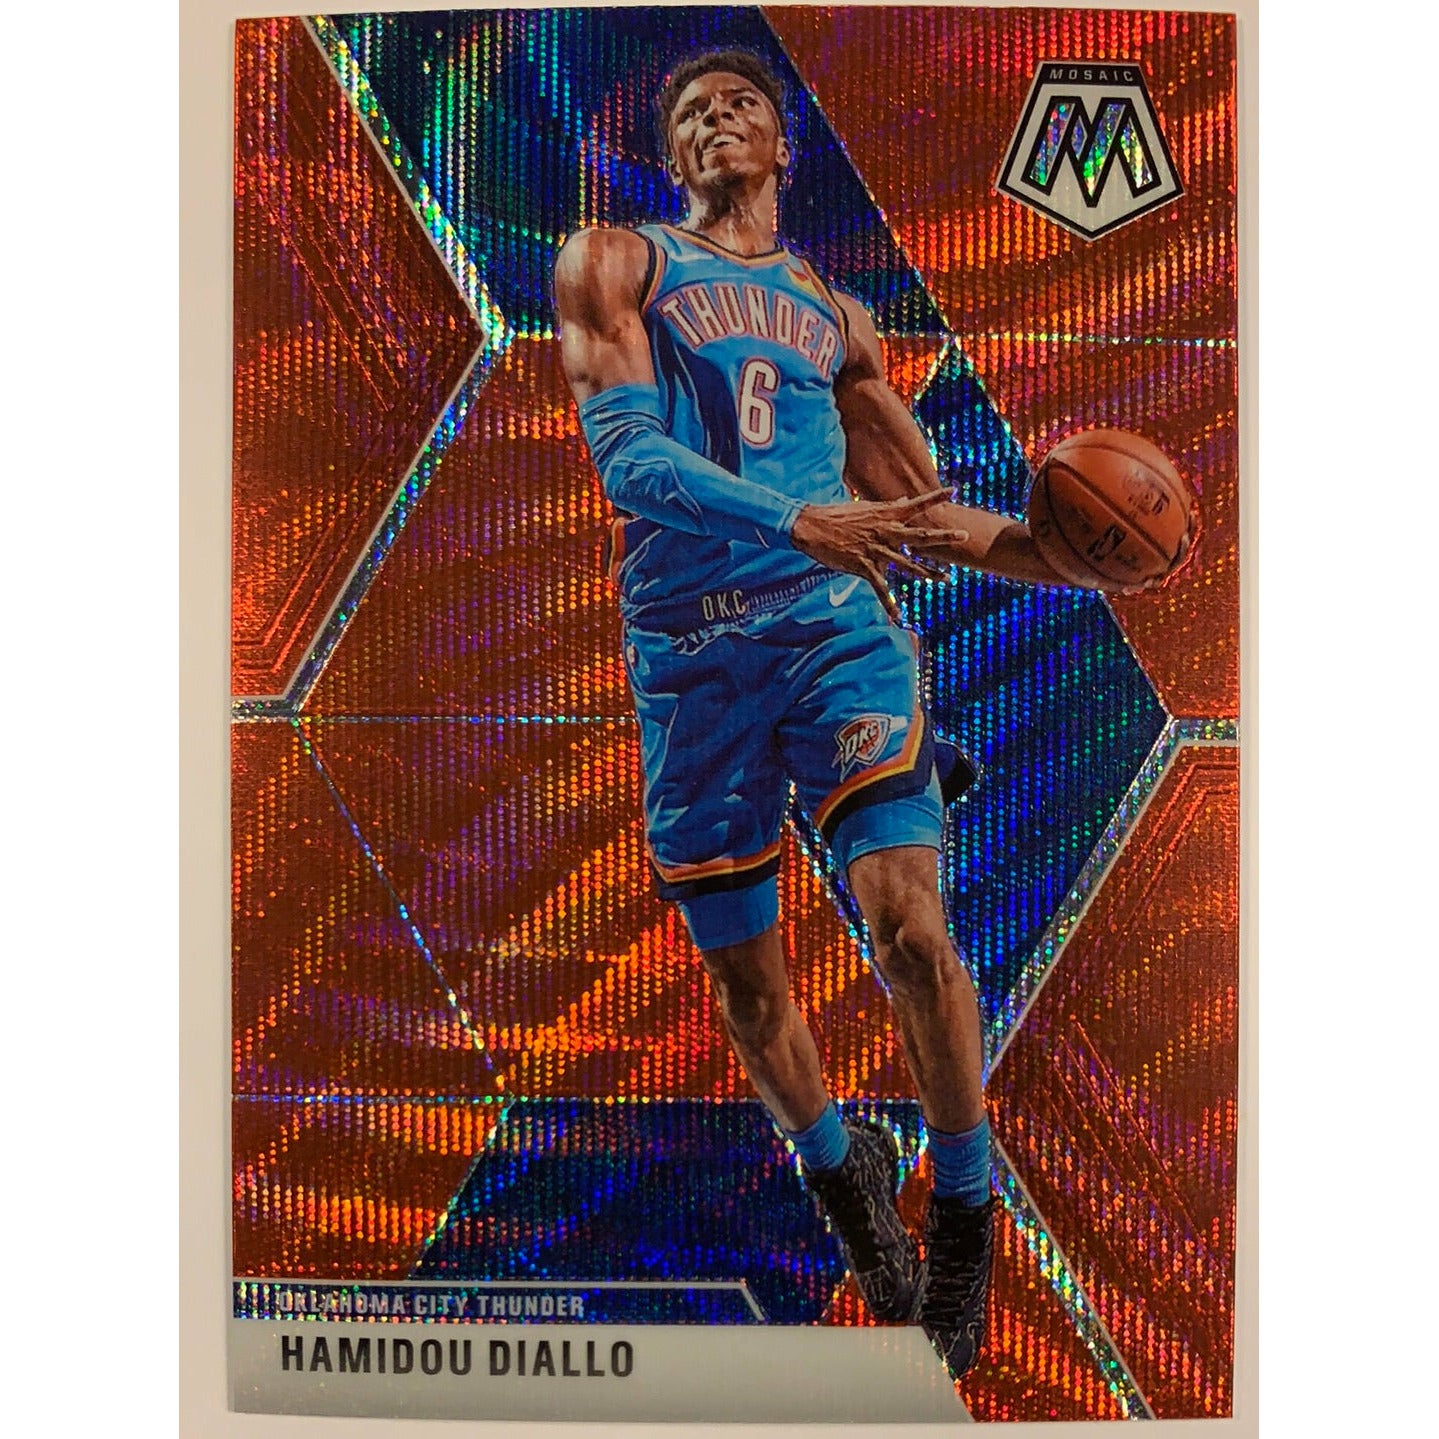  2019-20 Mosaic Hamidou Diallo TMall Red Wave Prizm  Local Legends Cards & Collectibles